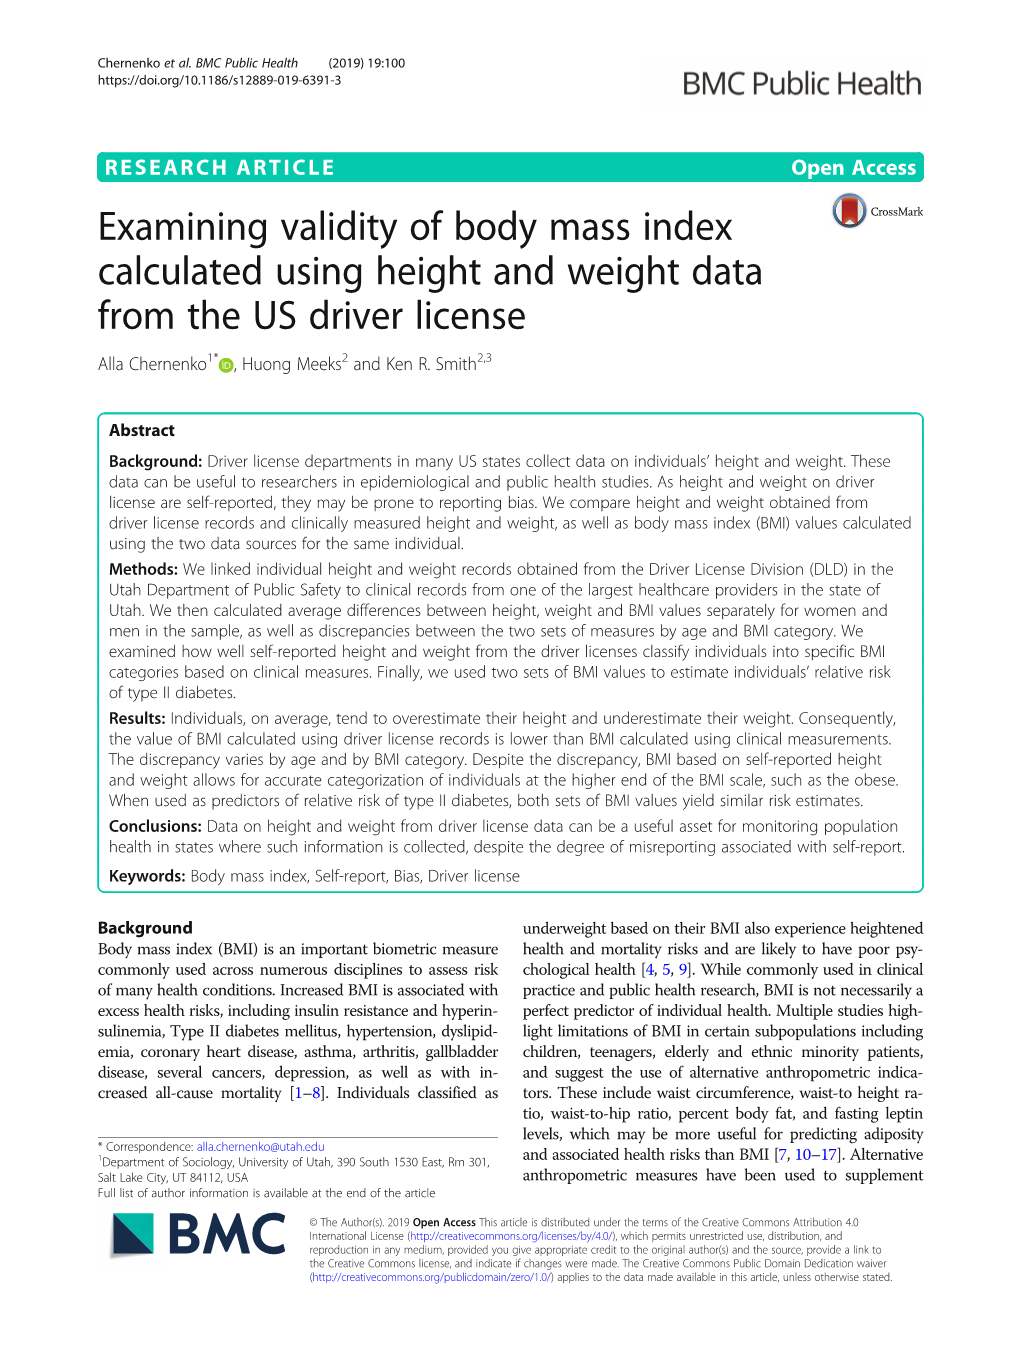 Examining Validity of Body Mass Index Calculated Using Height and Weight Data from the US Driver License Alla Chernenko1* , Huong Meeks2 and Ken R